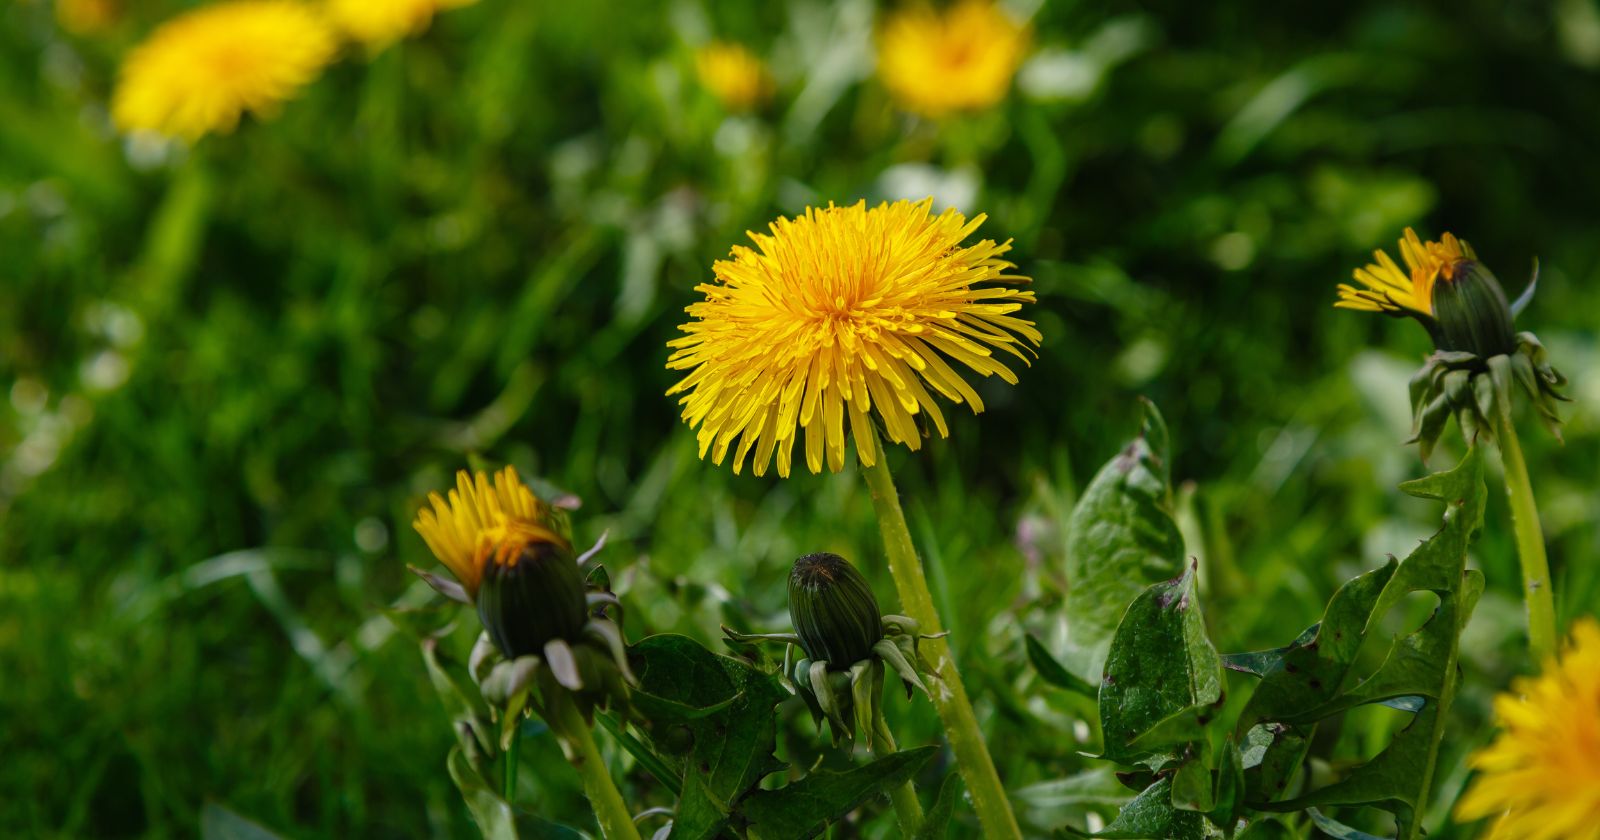 Here is the recipe for cramaillotte, dandelion "honey" from Franche-Comté